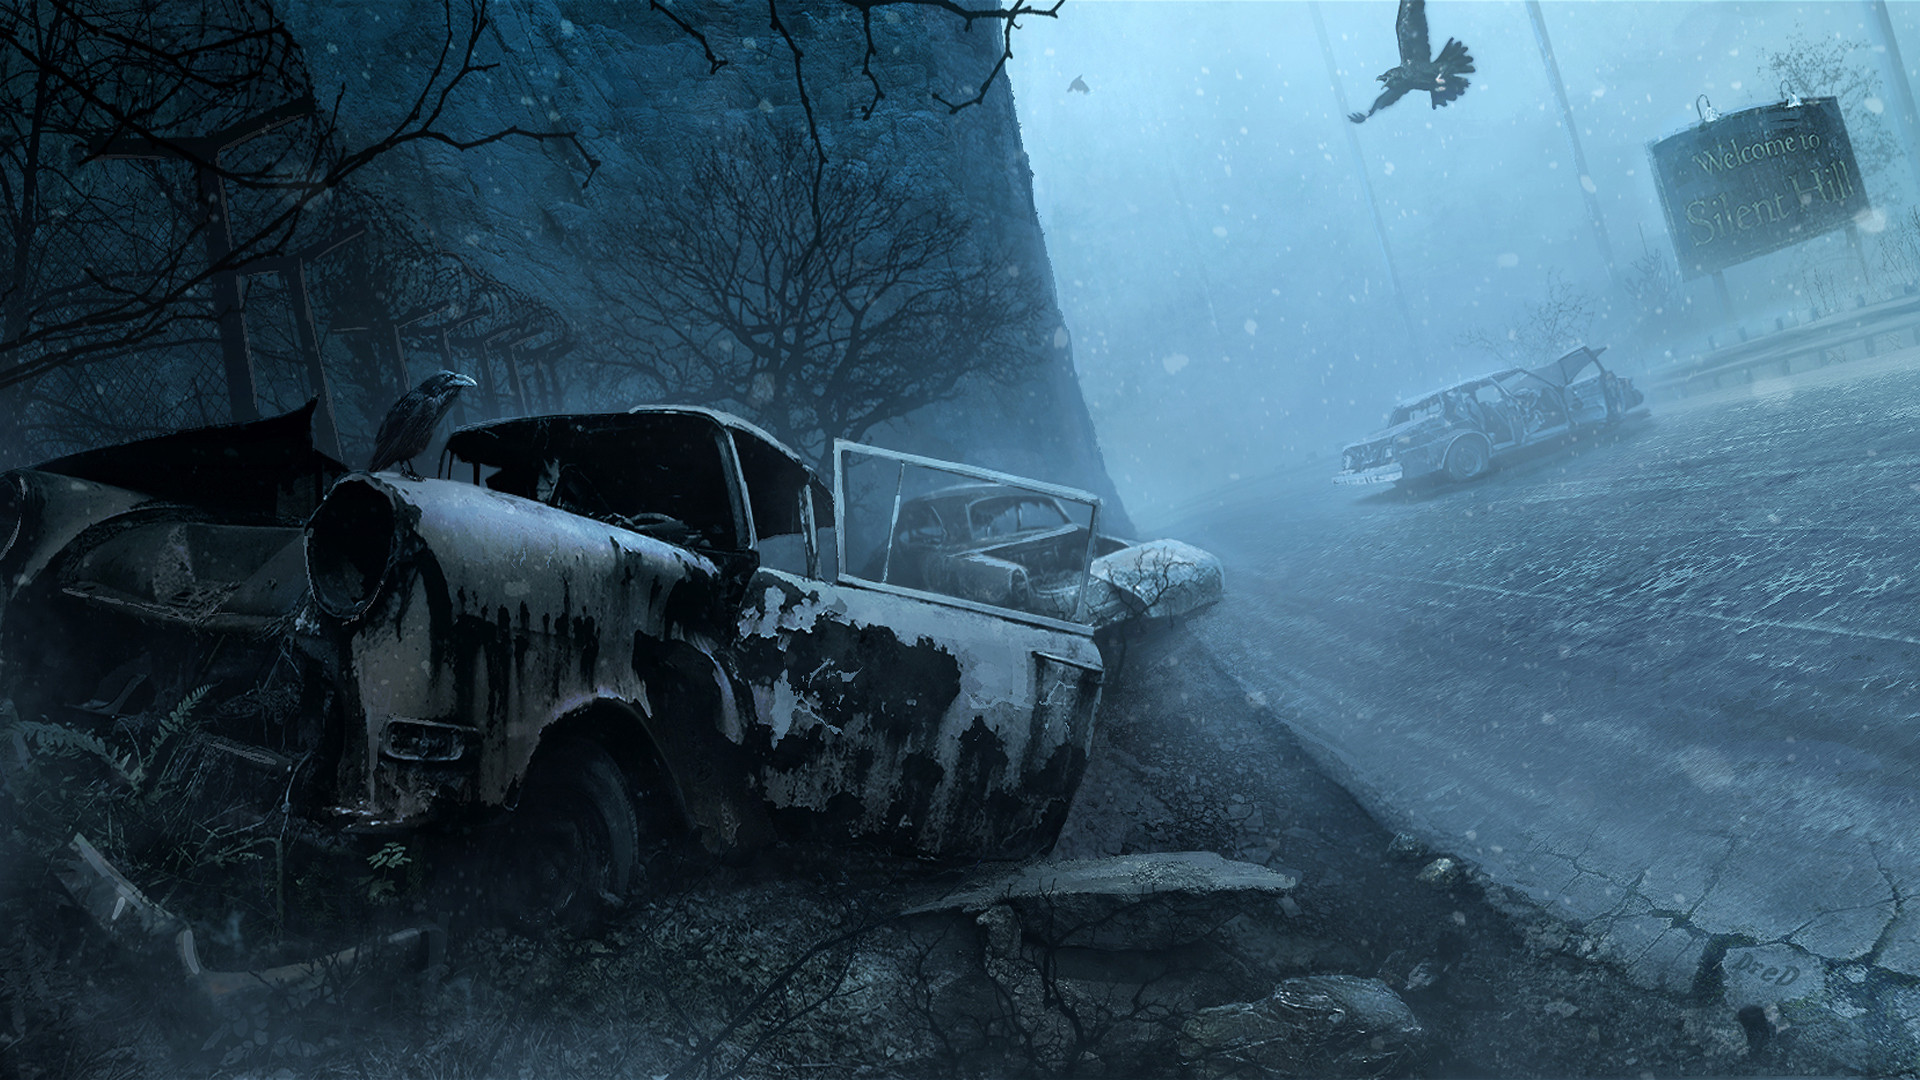 Wele To Silent Hill The Night Cars Snow Winter Birds Wallpaper